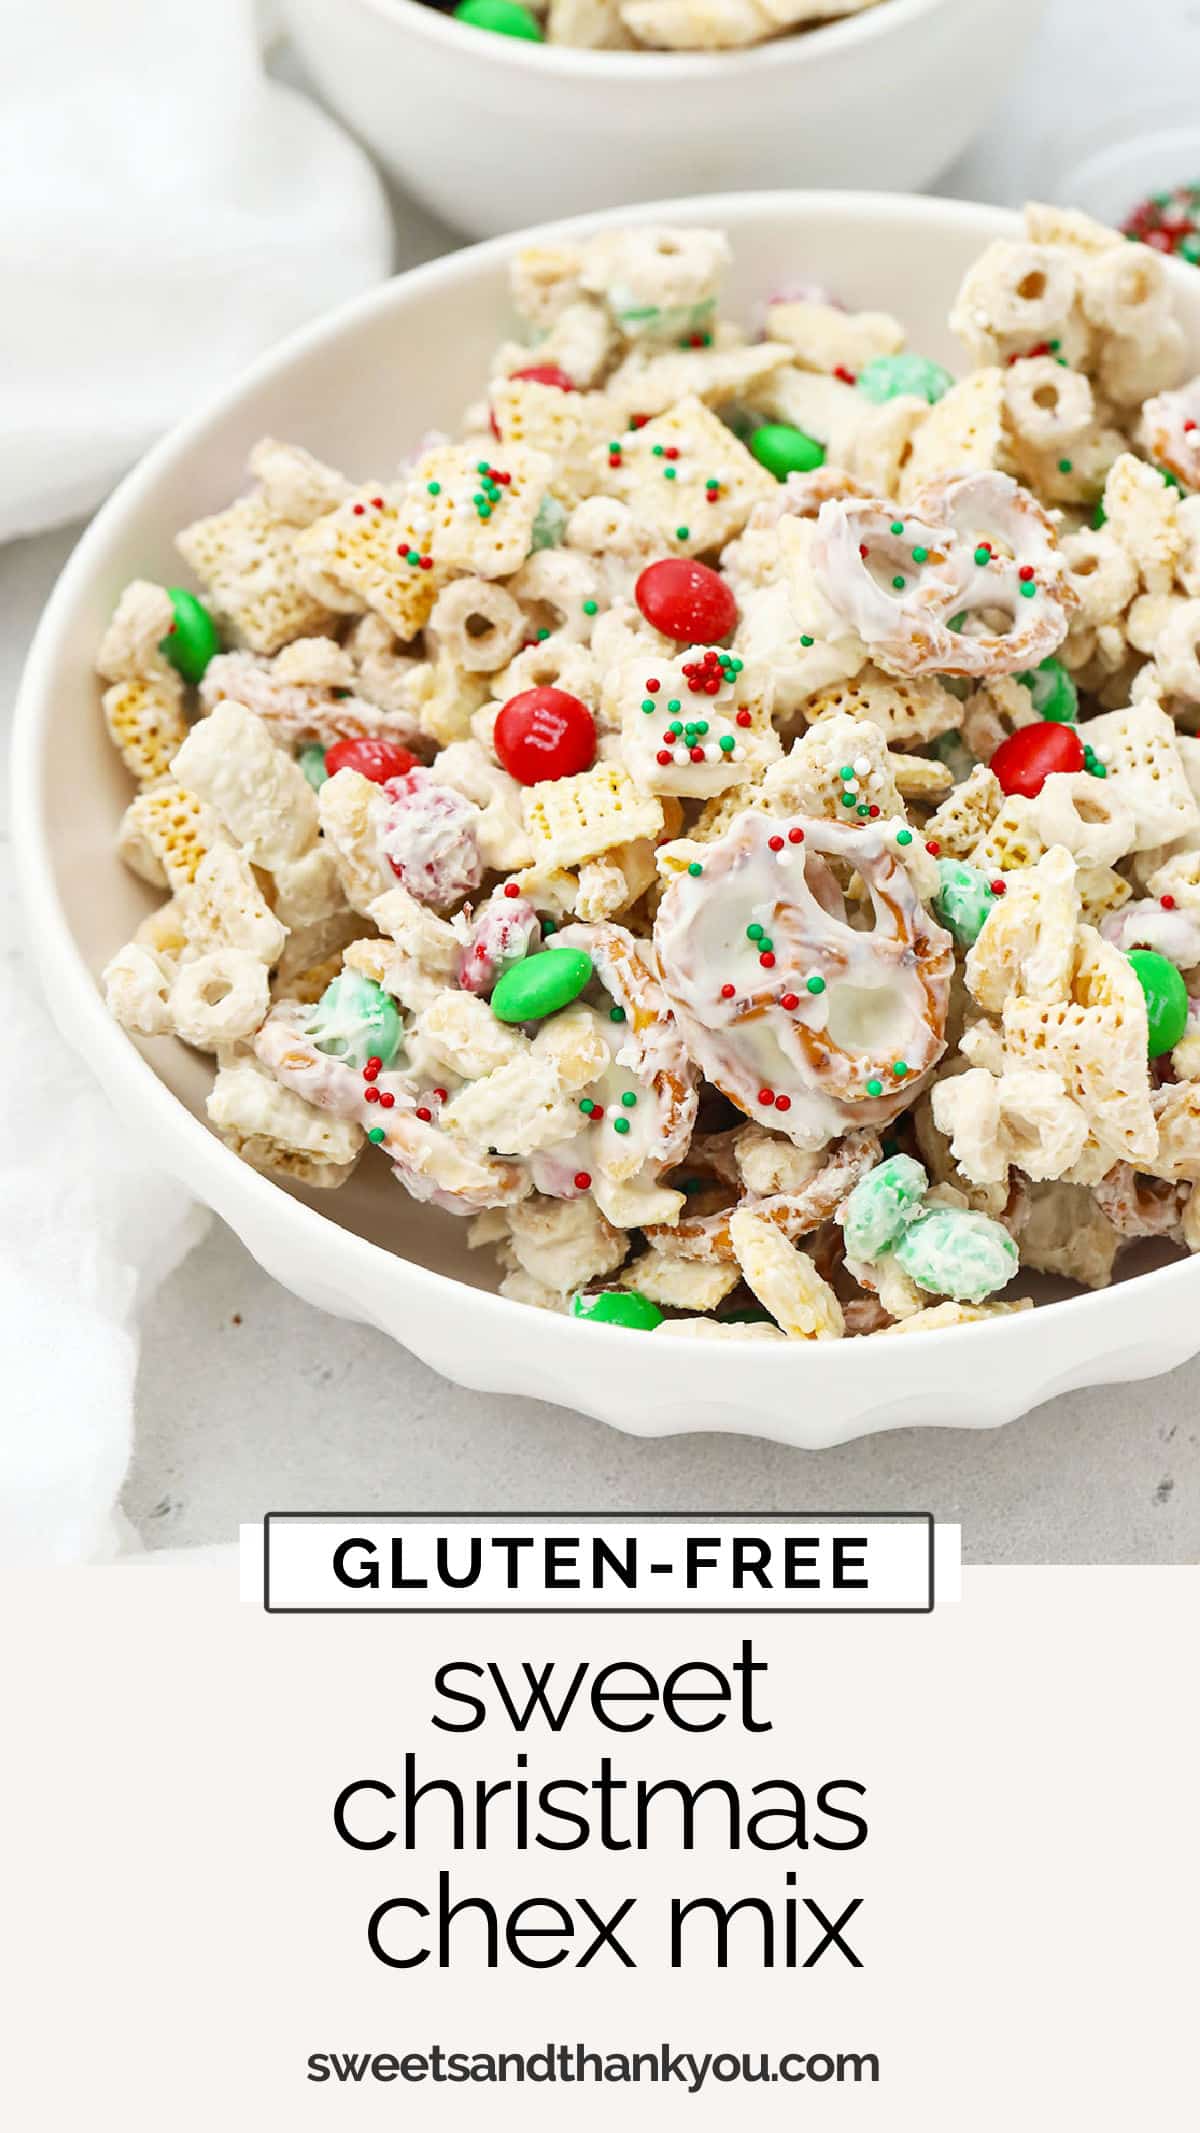 How to make gluten-free holiday chex mix - This easy gluten-free christmas chex recipe is so fun and festive! A perfect gift for friends & neighbors! / gluten-free holiday chex mix recipe / gluten-free chex mix recipe / gluten-free christmas crunch chex mix / gluten free chex mix with m&ms / no bake gluten-free christmas treats / gluten-free no-bake christmas recipes / gluten-free christmas treats / gluten-free christmas snack mix / gluten-free christmas recipe